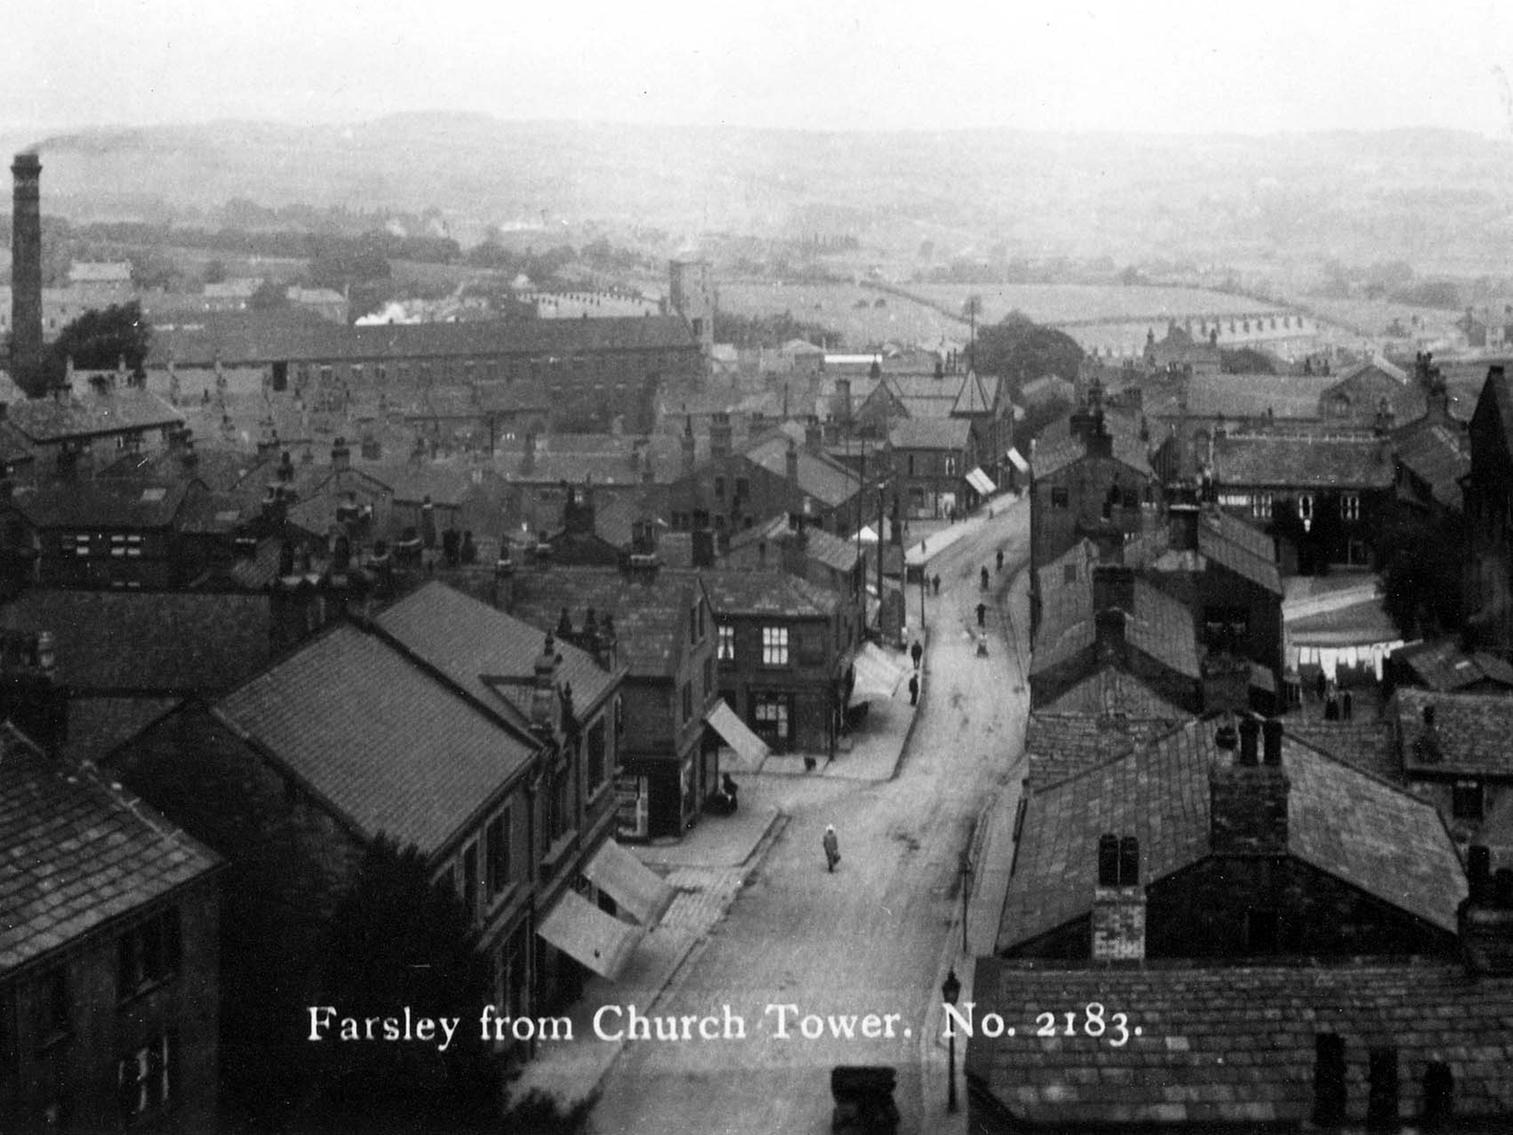 A view looking along Farsley Town Street, taken from St. John's Church Tower. The tall chimney on the left of the picture belongs to Sunny Bank Mills.